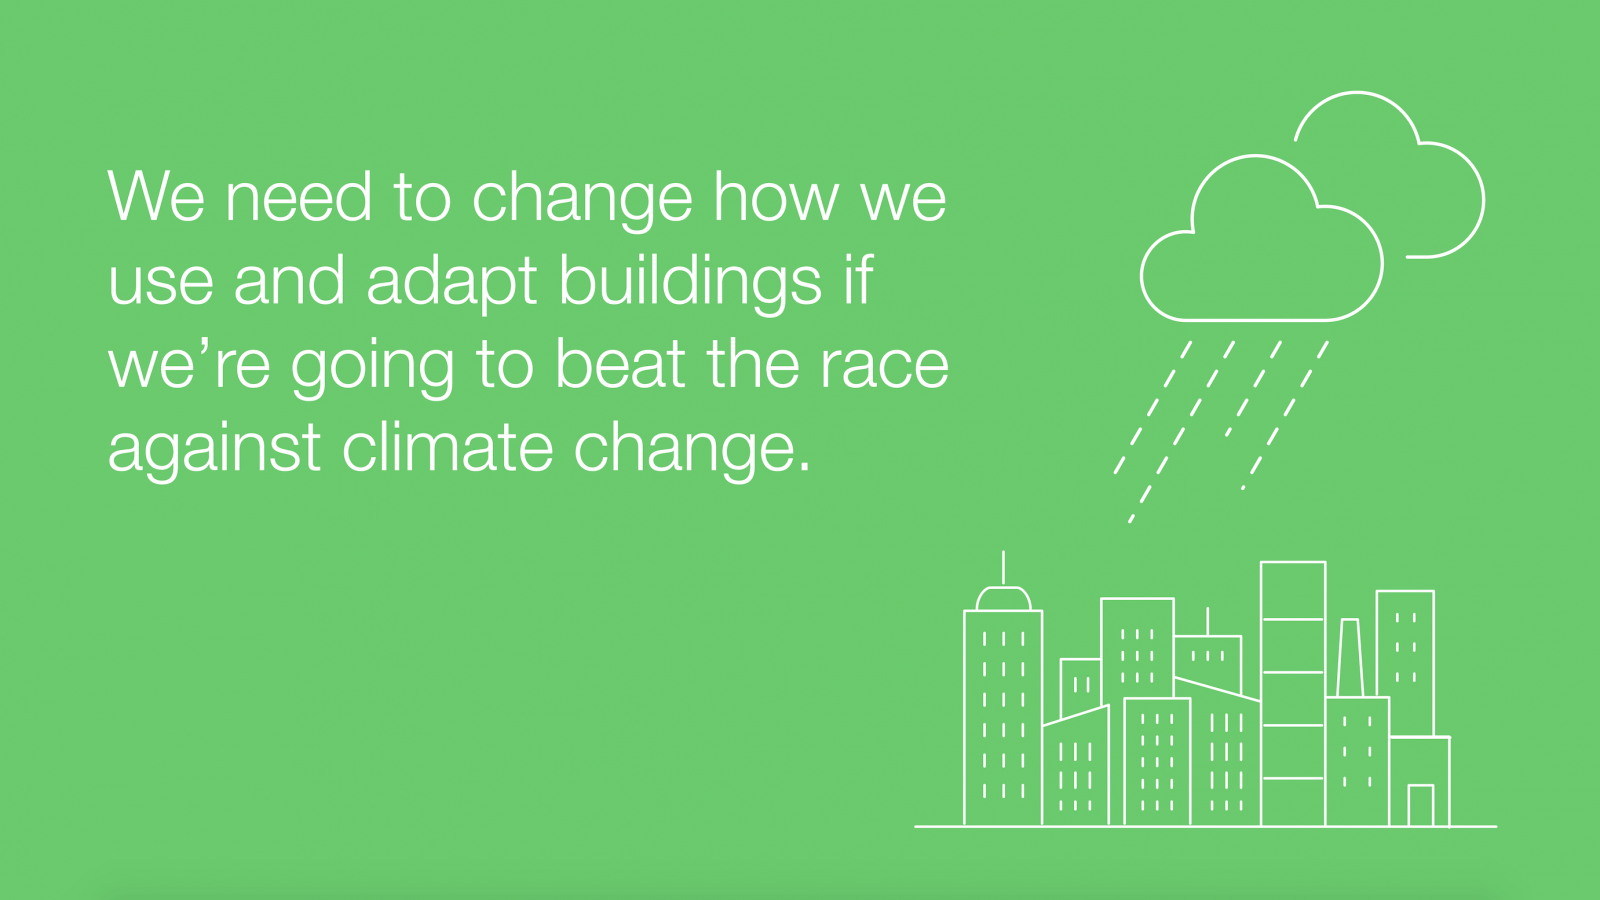 Sense_ means we can adapt the workspace to help combat climate change